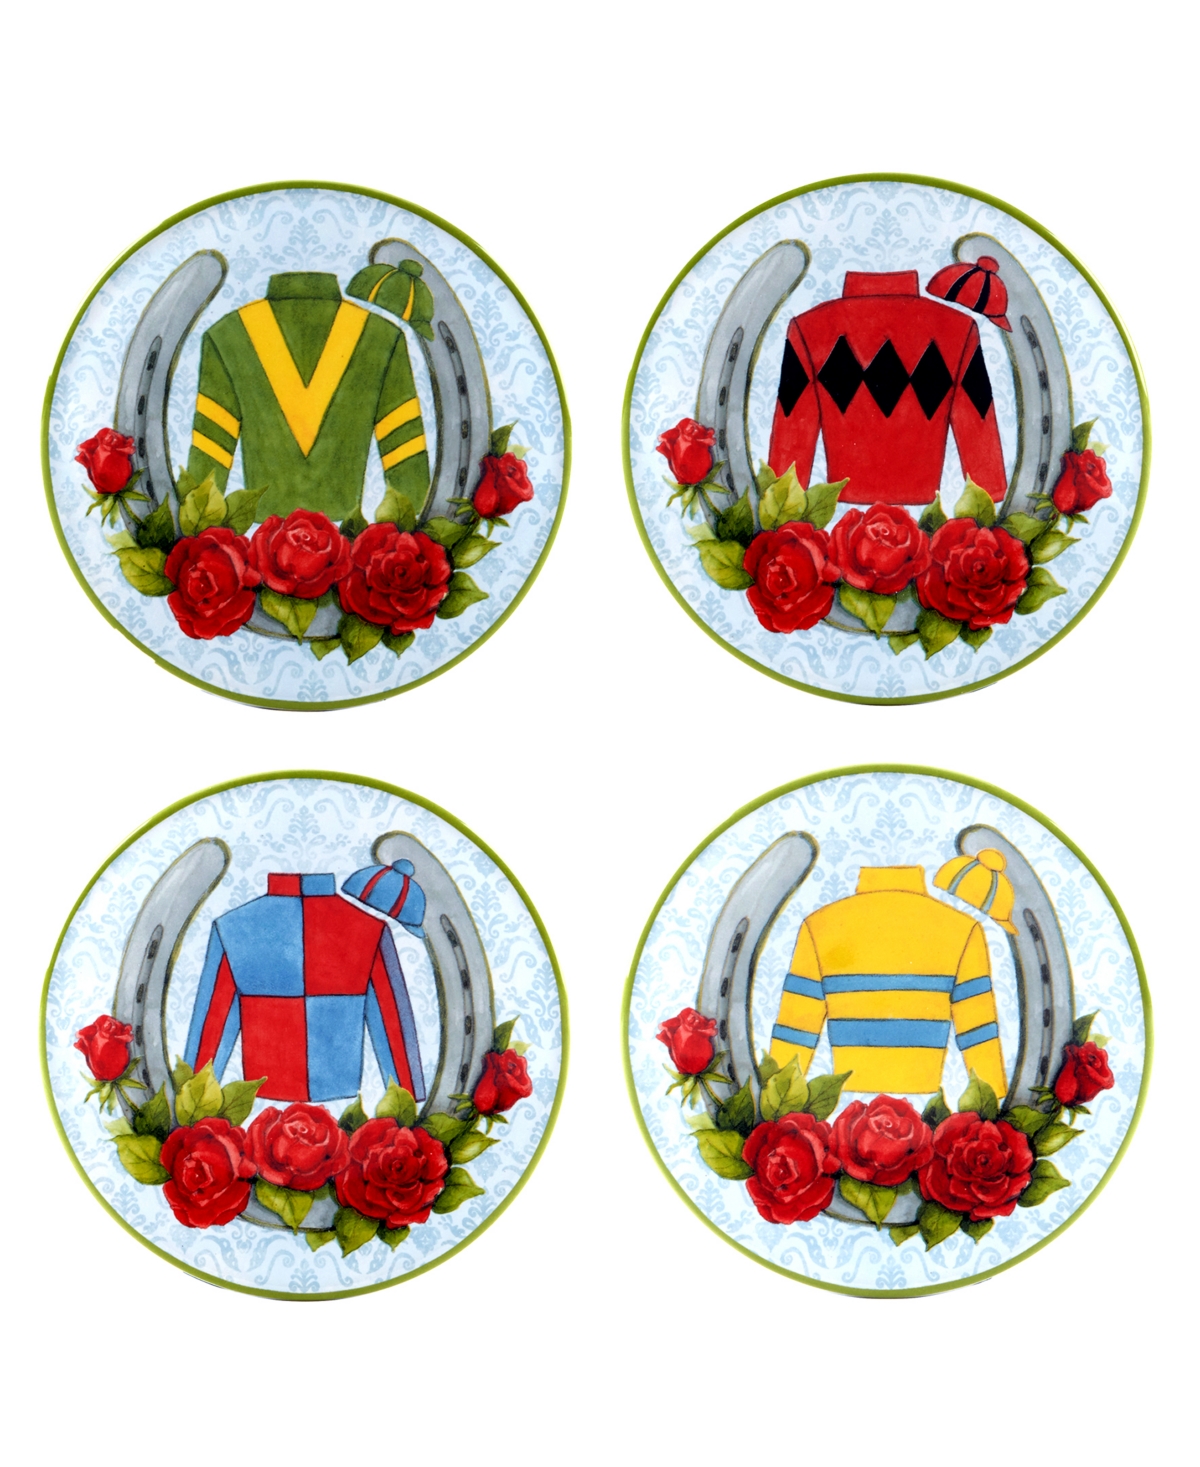 Derby Day at the Races Set of 4 Canape Plates - Miscellaneous